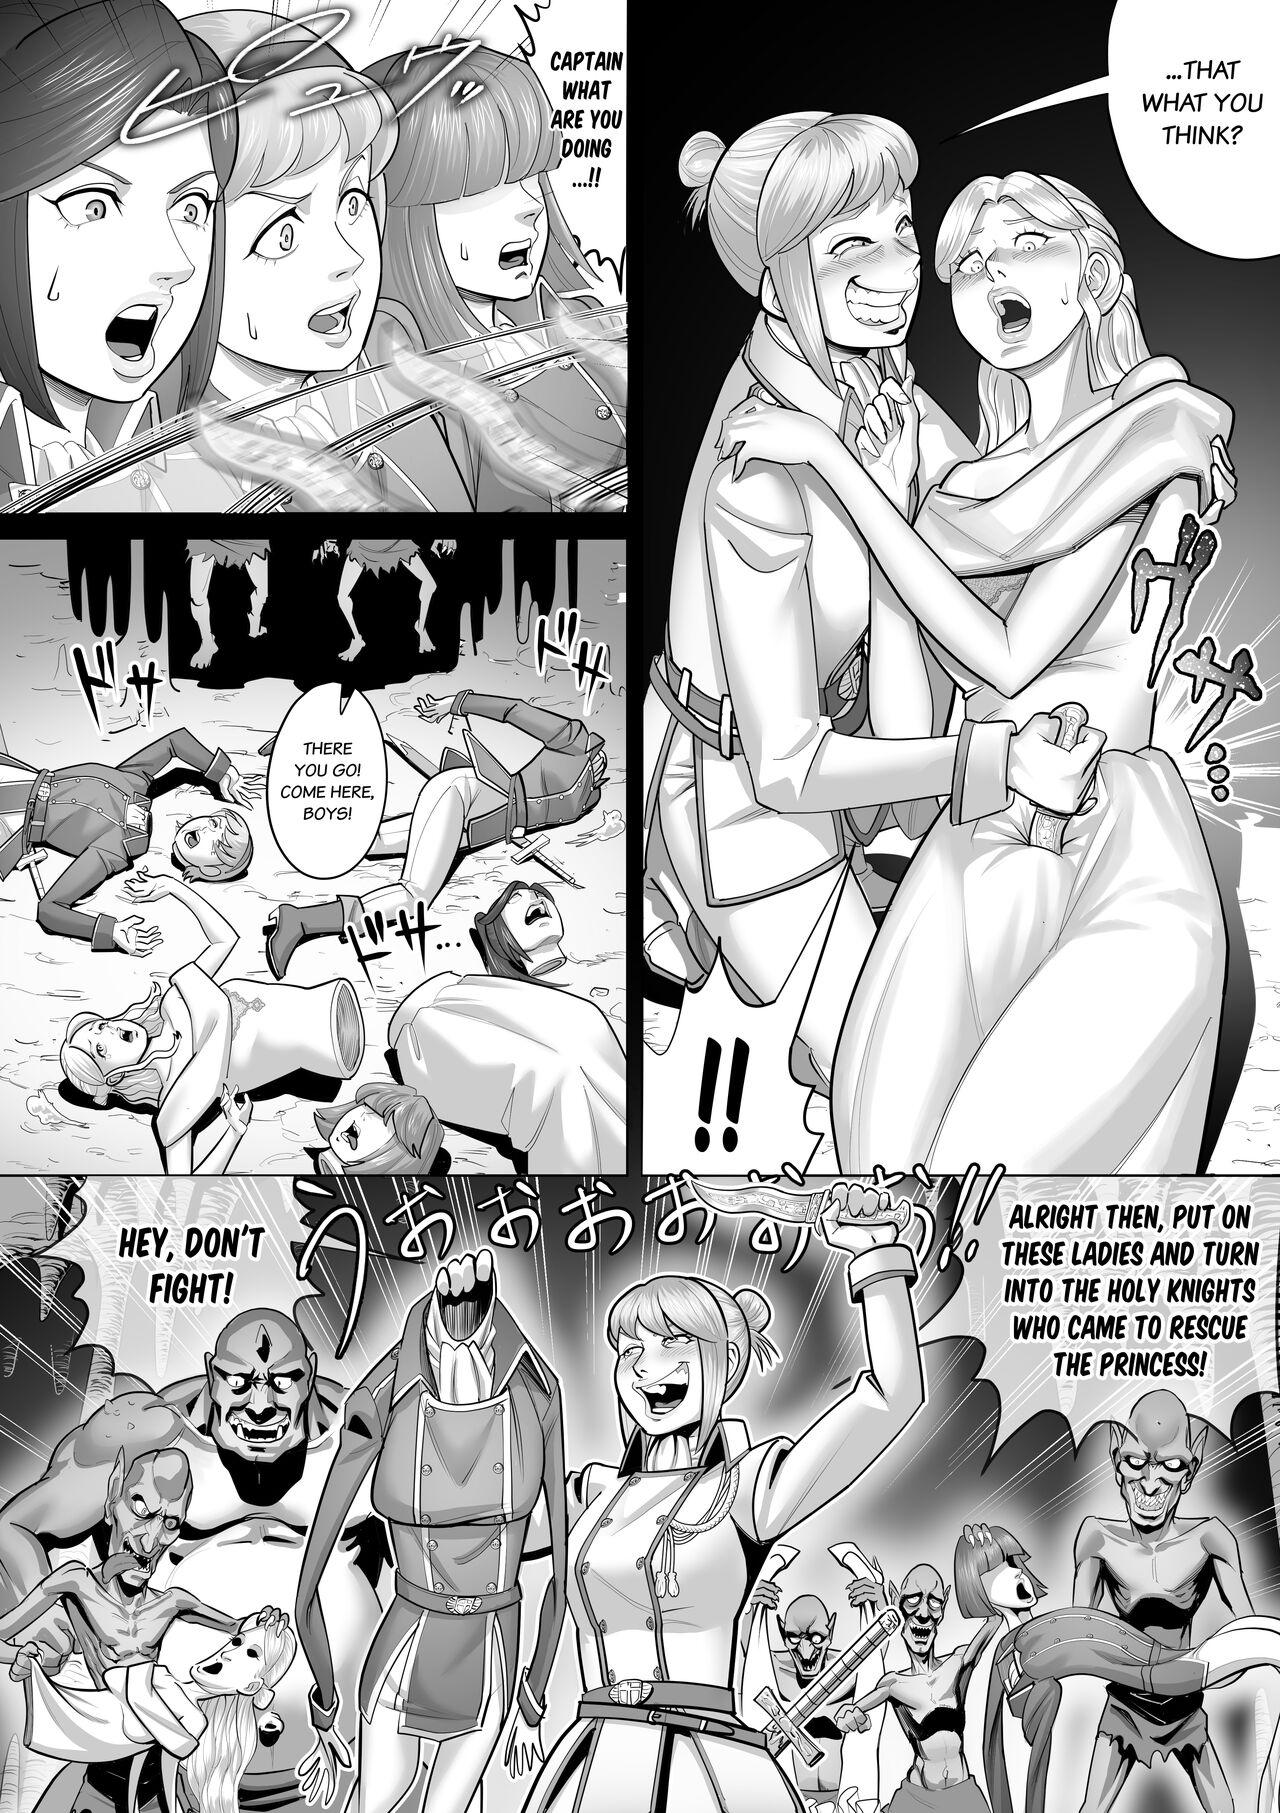 Beautiful The Reincarnated Orc's. A Story Of Possession In A Different World - Original Jerkoff - Page 10